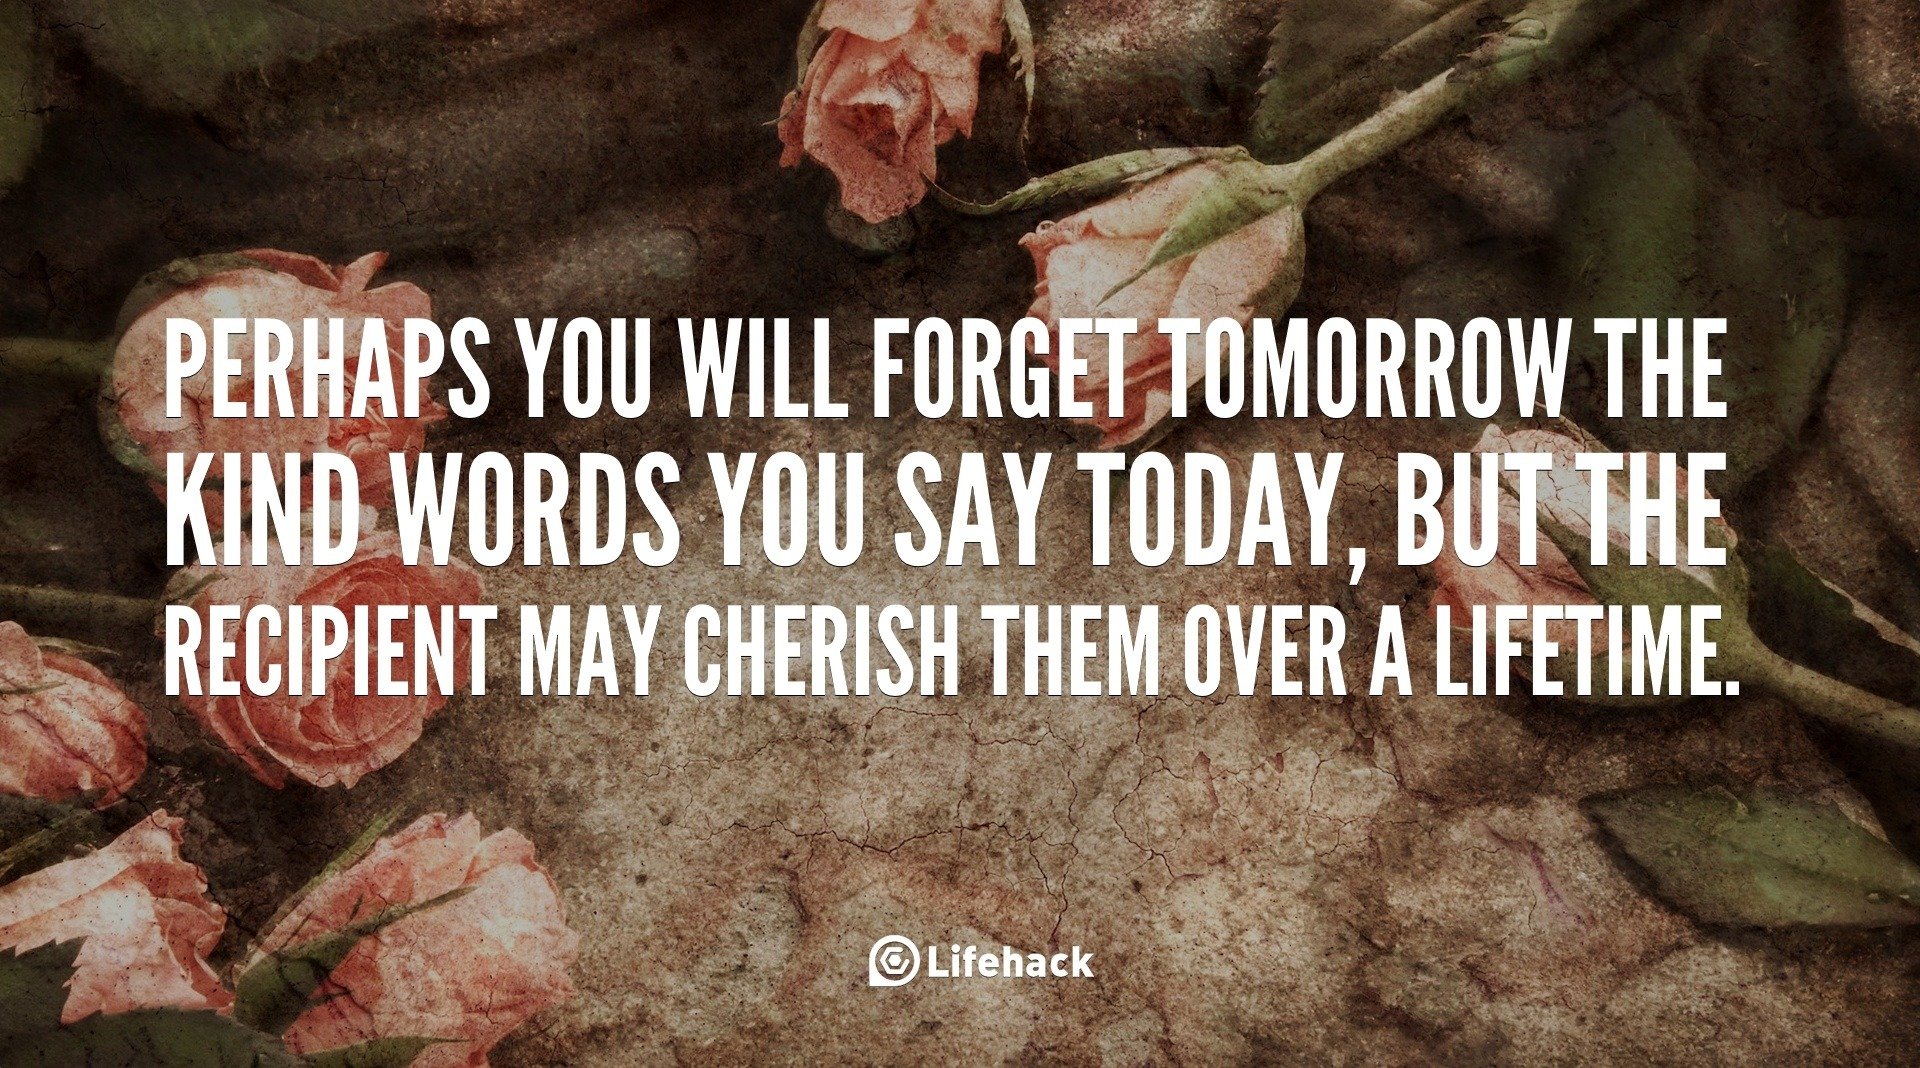 30sec Tip: You will Forget Tomorrow The Kind Words You Say Today